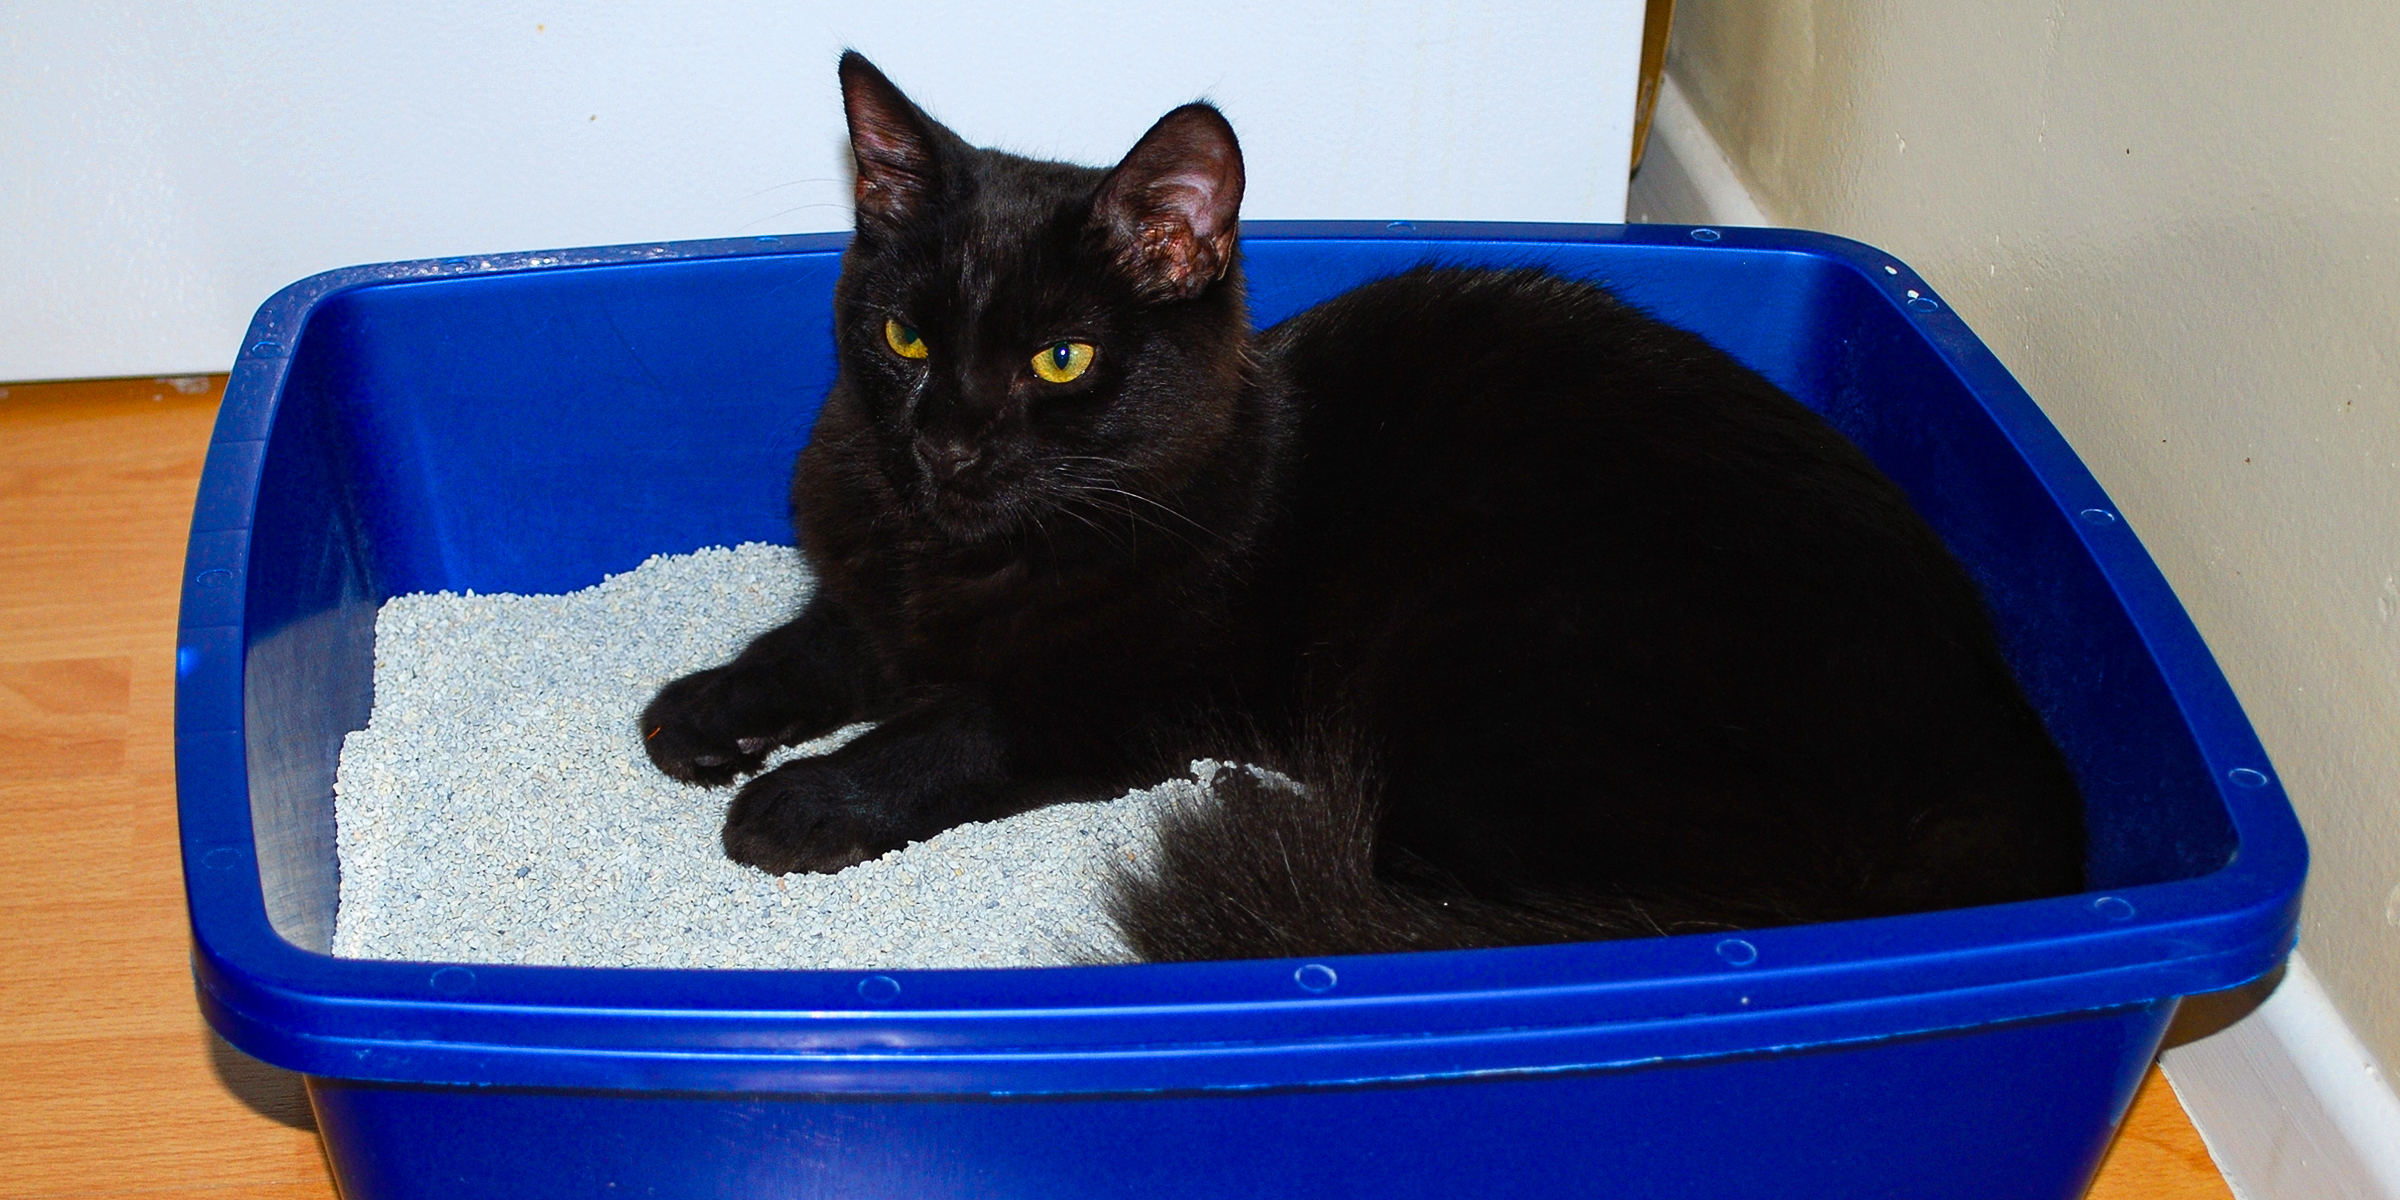 A cat in a litter box | Source: Flickr/wolfsavard/CC BY 2.0